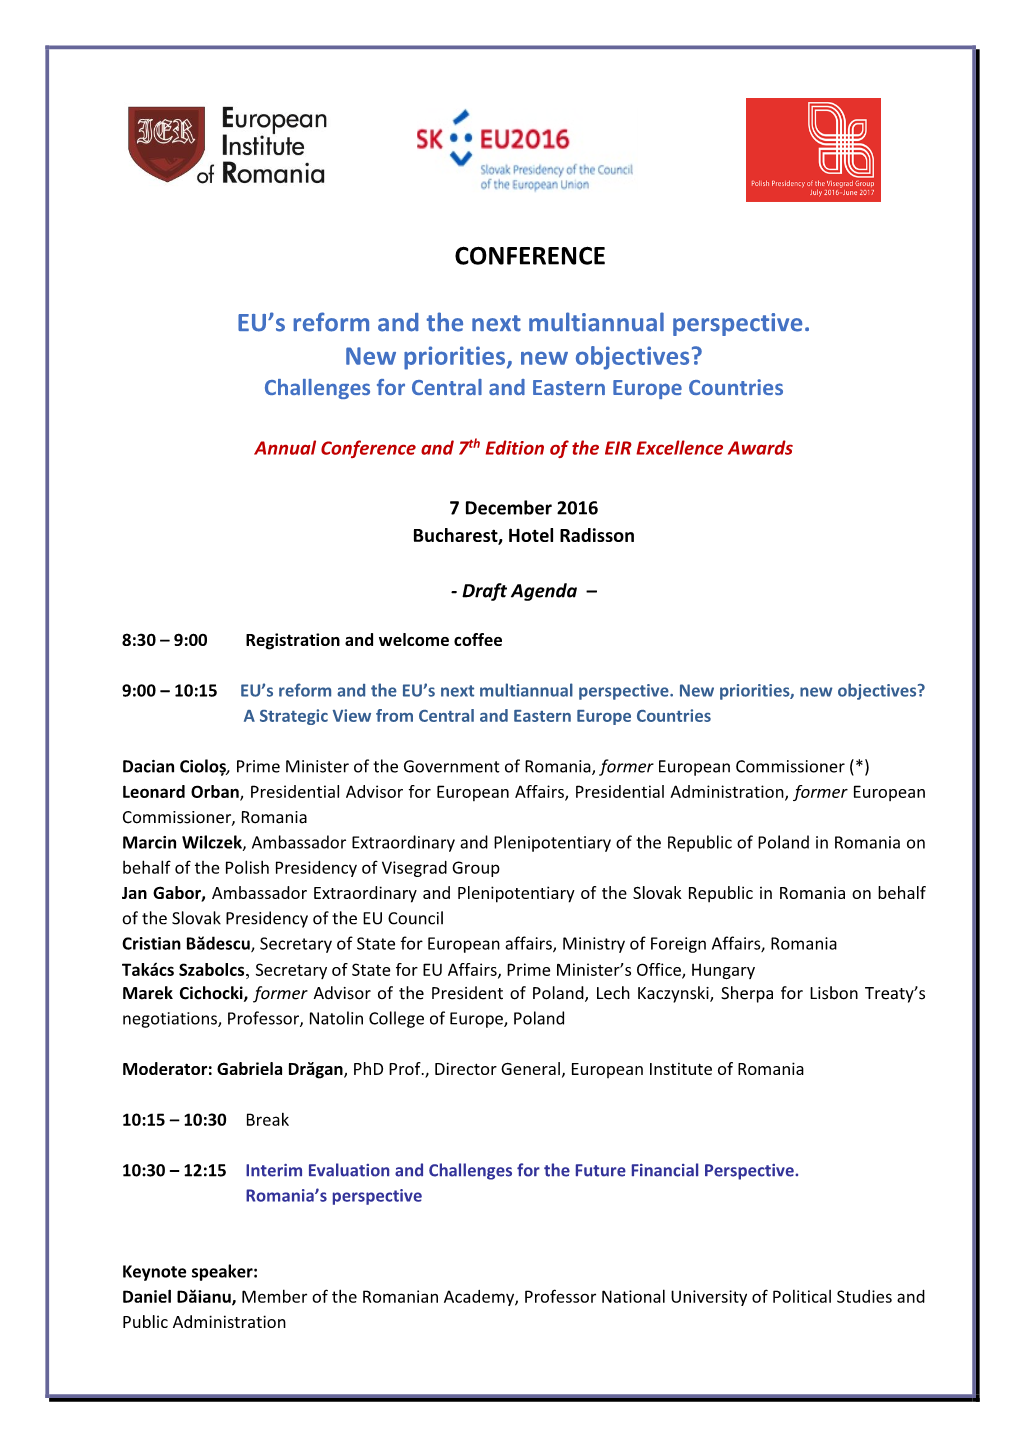 Conference on Economic and Financial Crisis